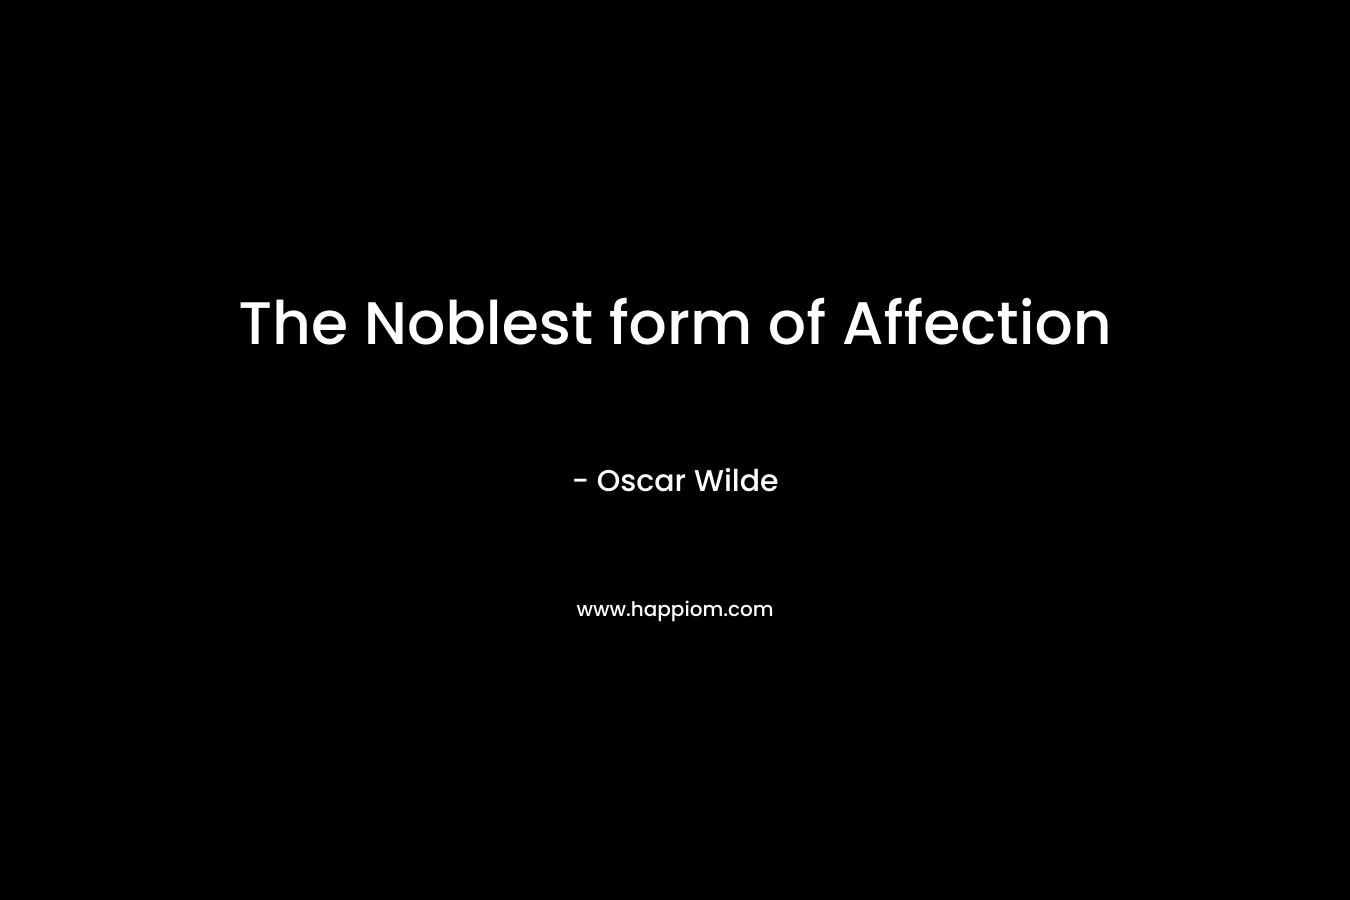 The Noblest form of Affection